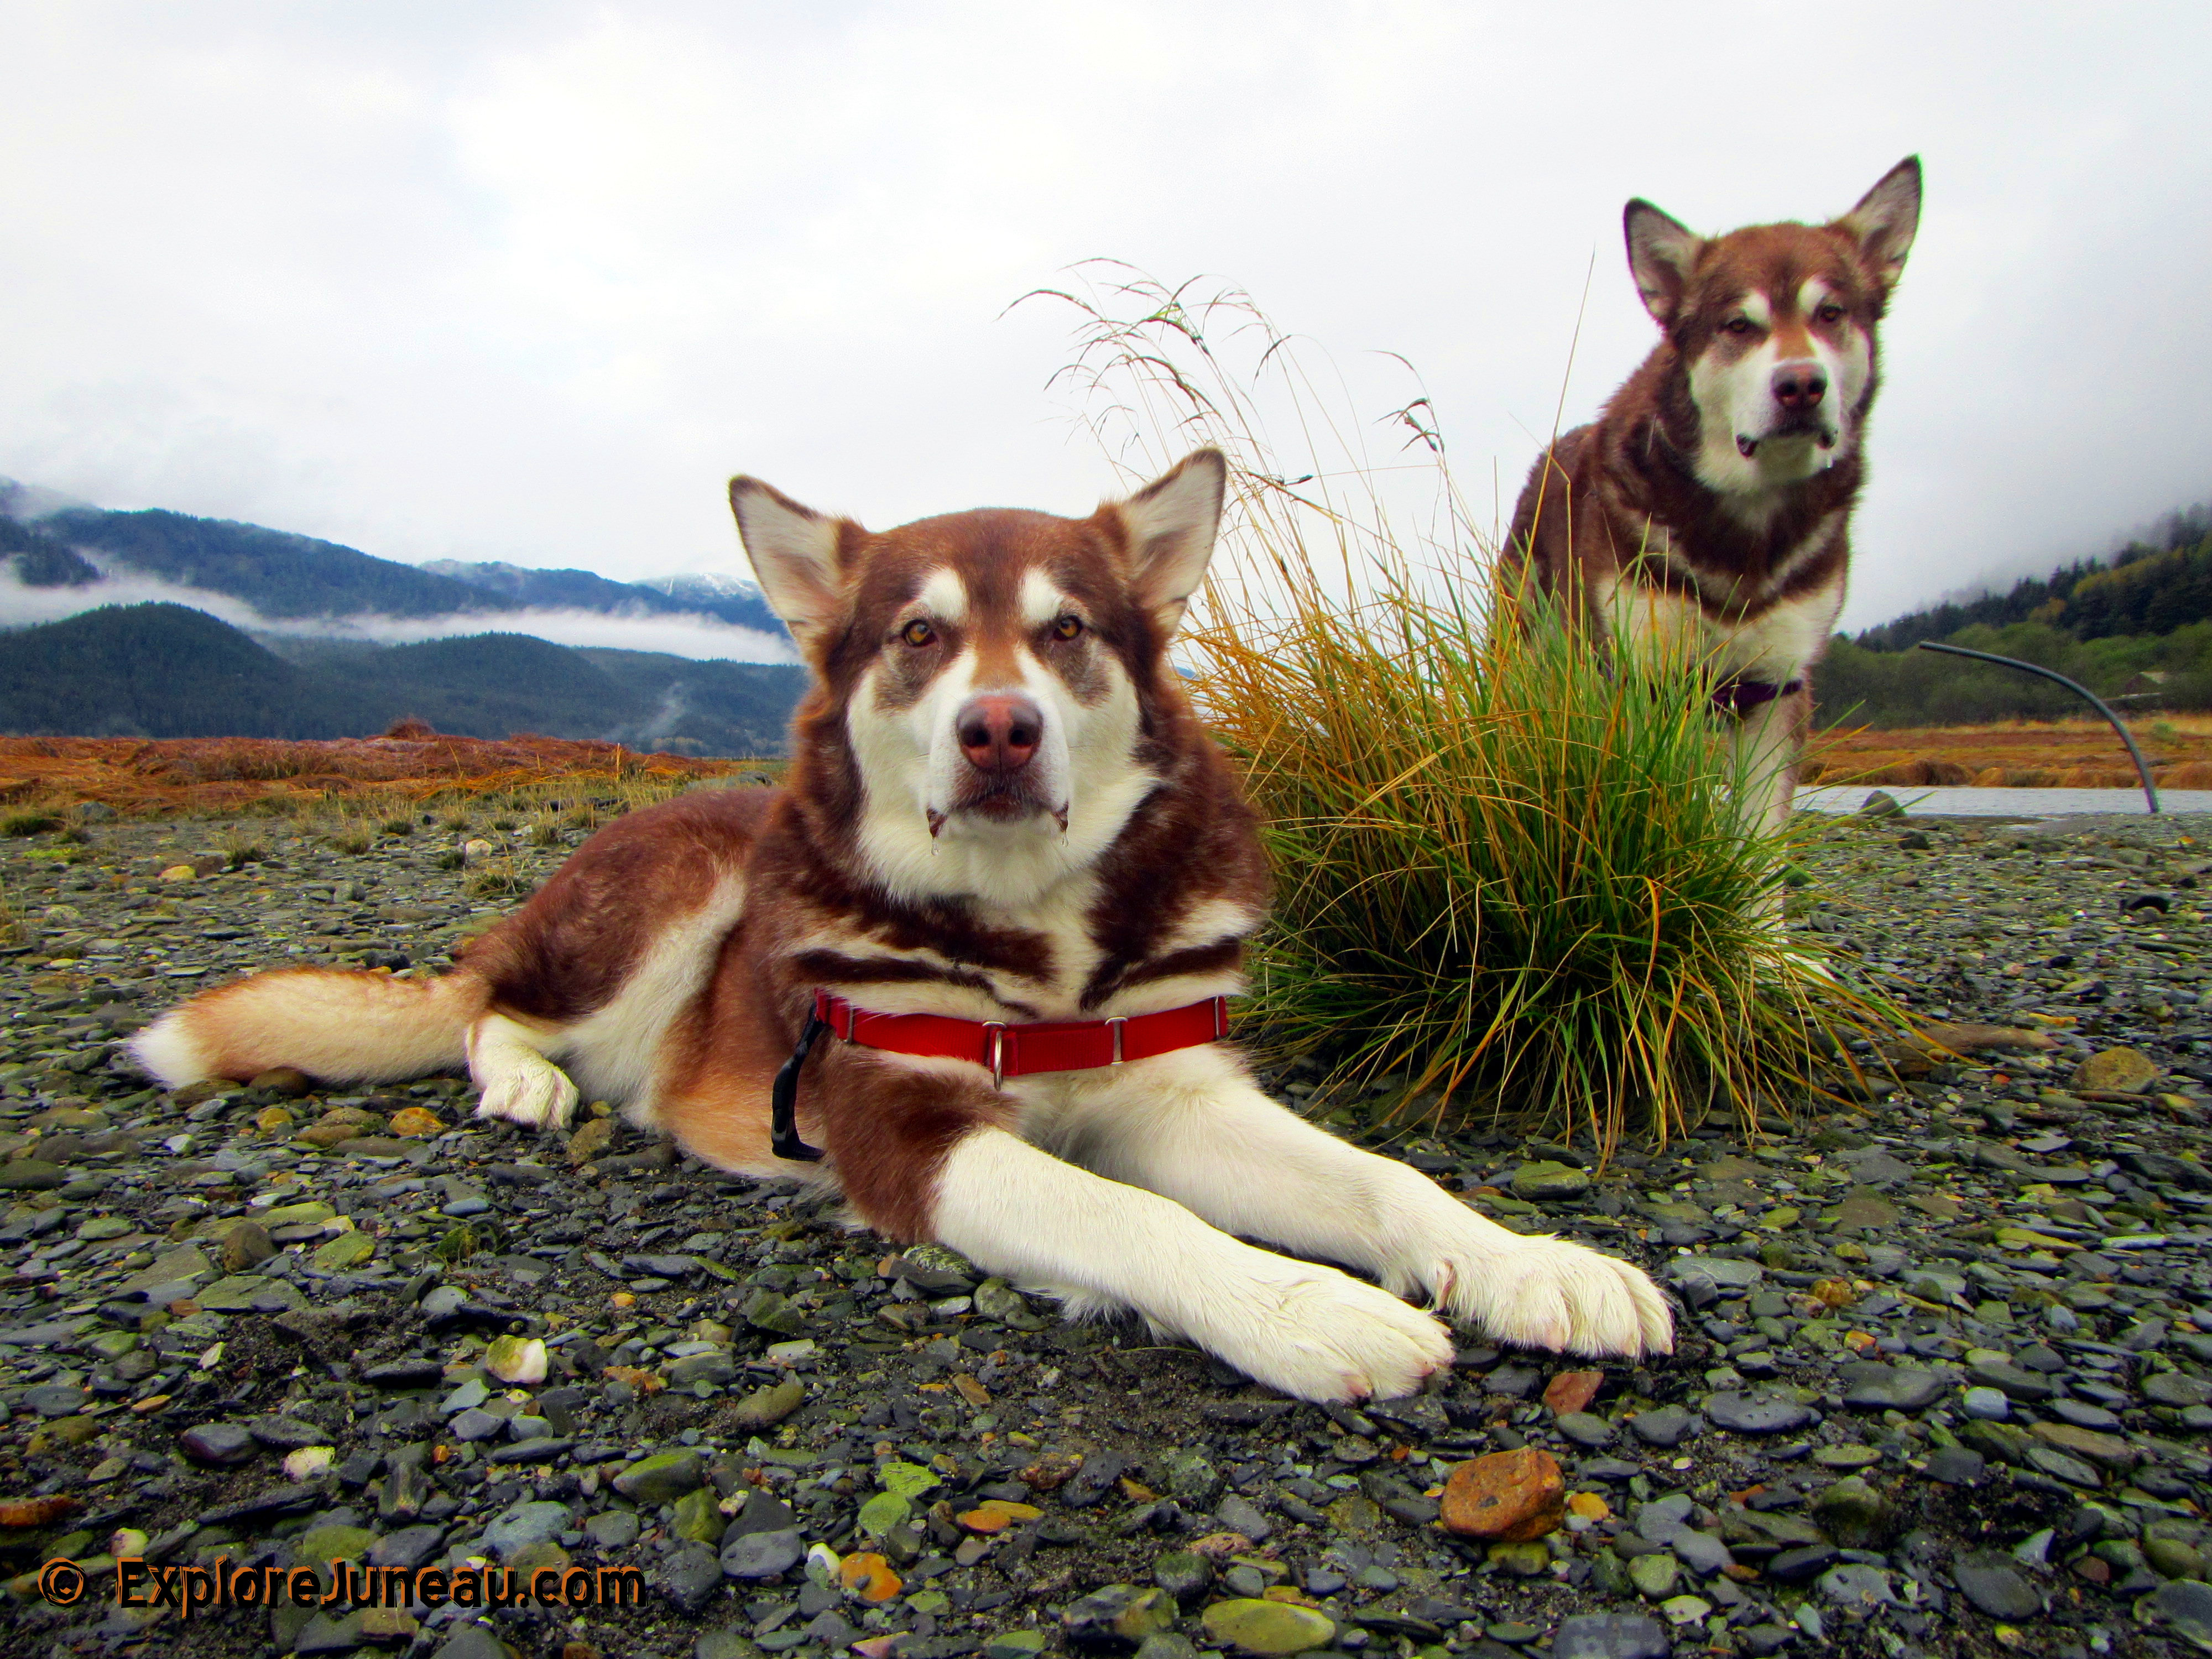 Freya (Herself) and Skadi with Russell Josh Peterson @ Sheep Creek, Juneau Alaska. Thank you for your Kindness and Support please click Like on each photo and demo reel you enjoy!